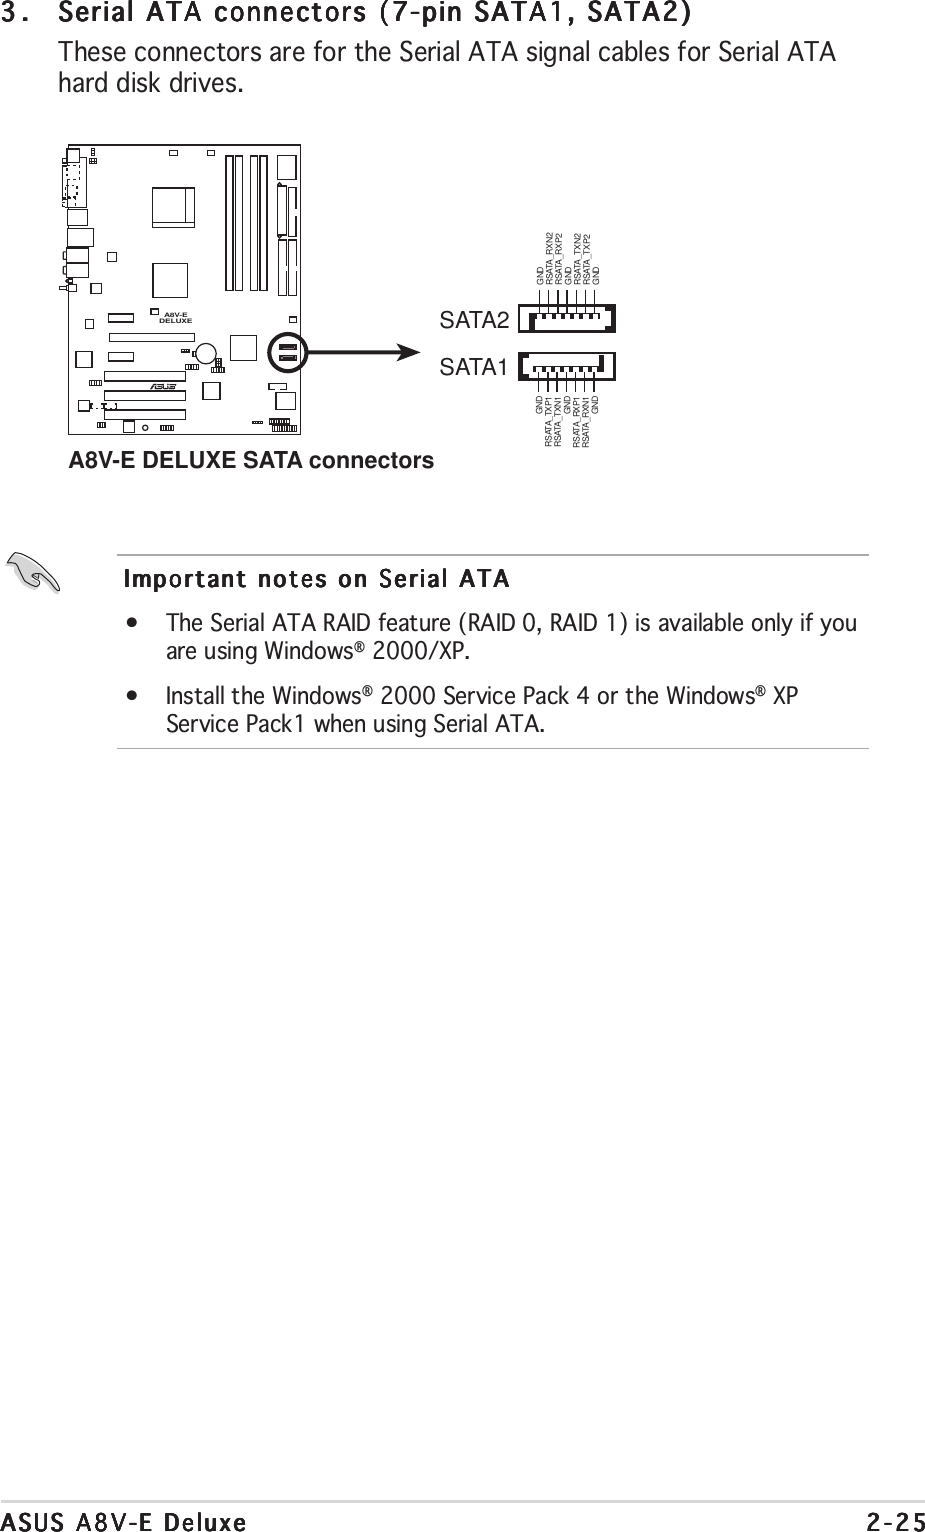 ASUS A8V-E DeluxeASUS A8V-E DeluxeASUS A8V-E DeluxeASUS A8V-E DeluxeASUS A8V-E Deluxe 2-252-252-252-252-253.3.3.3.3. Serial ATA connectors (7-pin SATA1, SATA2)Serial ATA connectors (7-pin SATA1, SATA2)Serial ATA connectors (7-pin SATA1, SATA2)Serial ATA connectors (7-pin SATA1, SATA2)Serial ATA connectors (7-pin SATA1, SATA2)These connectors are for the Serial ATA signal cables for Serial ATAhard disk drives.Important notes on Serial ATAImportant notes on Serial ATAImportant notes on Serial ATAImportant notes on Serial ATAImportant notes on Serial ATA•The Serial ATA RAID feature (RAID 0, RAID 1) is available only if youare using Windows® 2000/XP.•Install the Windows® 2000 Service Pack 4 or the Windows® XPService Pack1 when using Serial ATA.A8V-EDELUXERA8V-E DELUXE SATA connectorsSATA1GNDRSATA_TXP1RSATA_TXN1GNDRSATA_RXP1RSATA_RXN1GNDSATA2GNDRSATA_TXP2RSATA_TXN2GNDRSATA_RXP2RSATA_RXN2GND